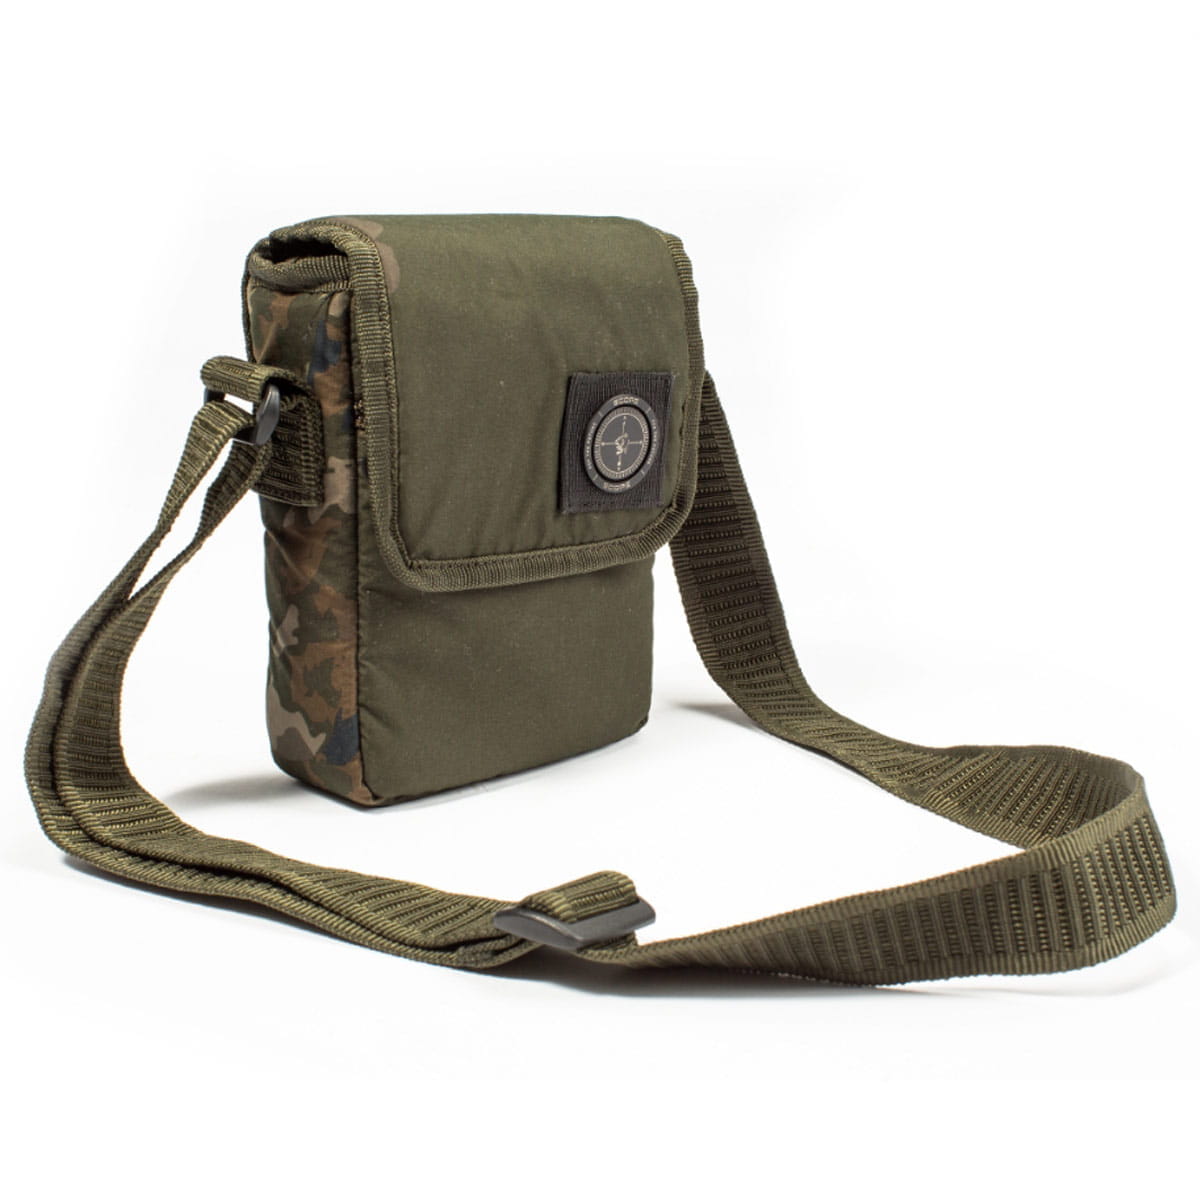 Scope Ops Security Pouch Main